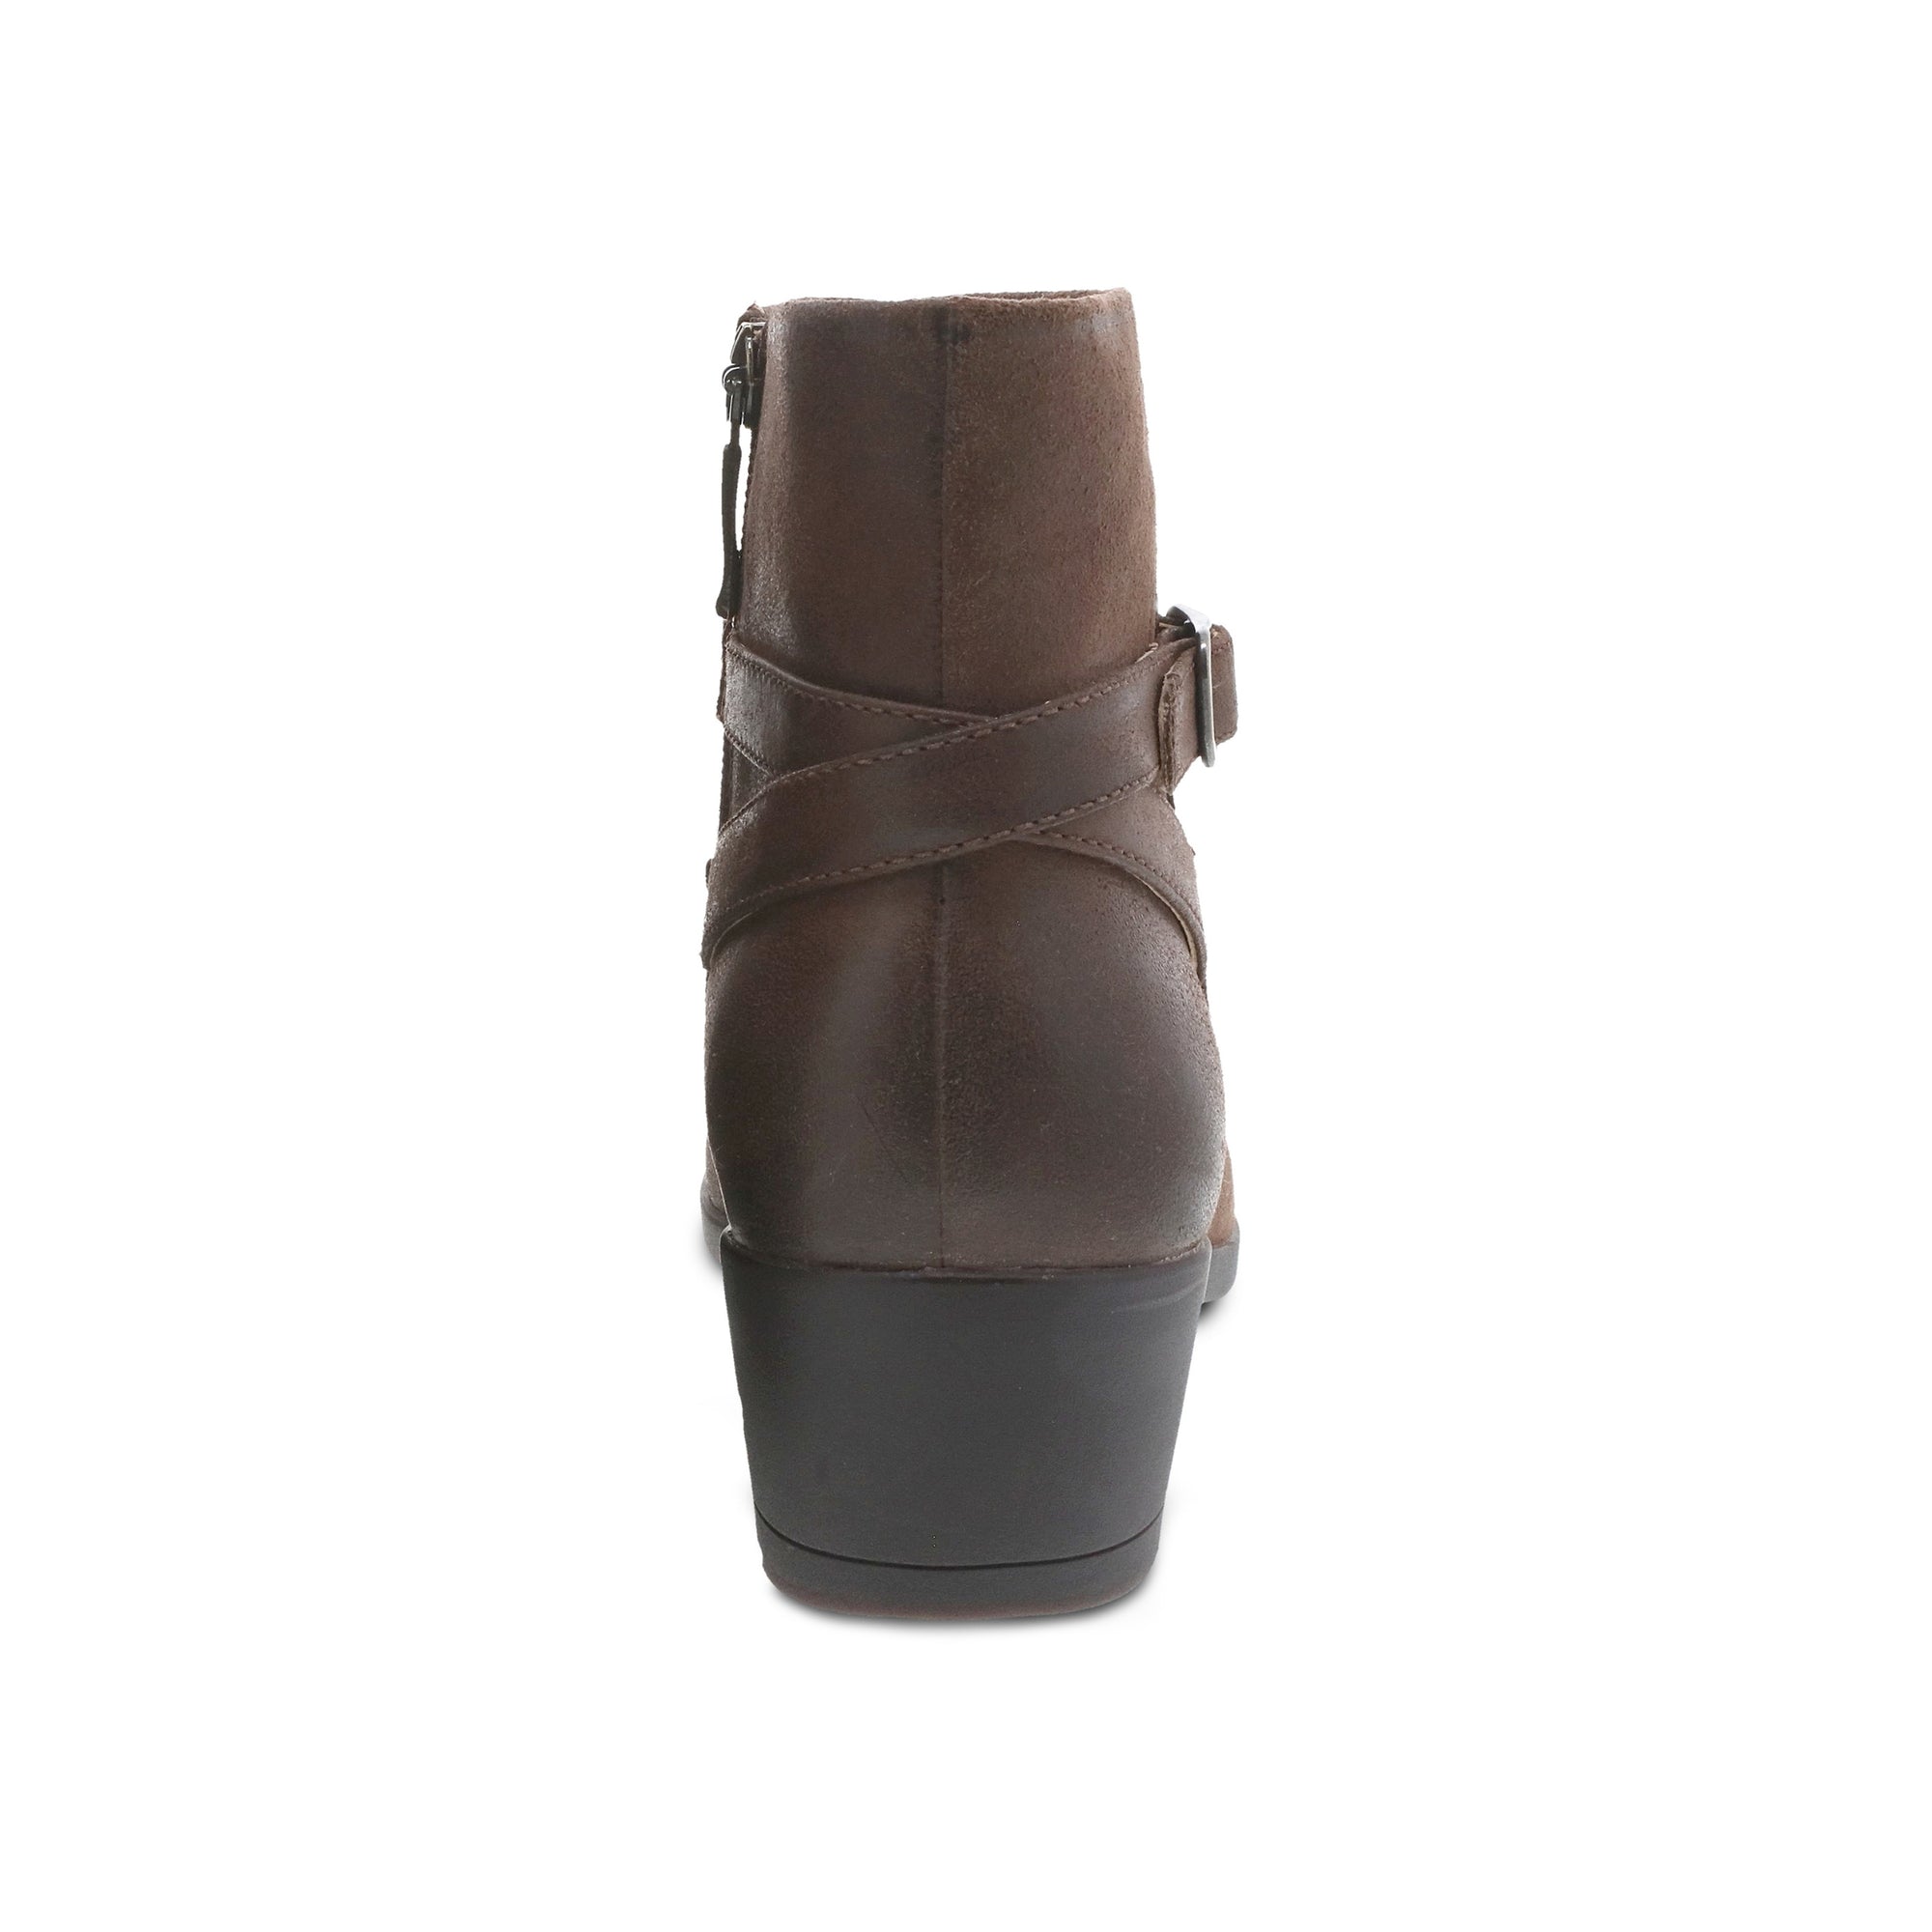 Mid-shaft boot shown from back to highlight strap detail and high-quality leather.